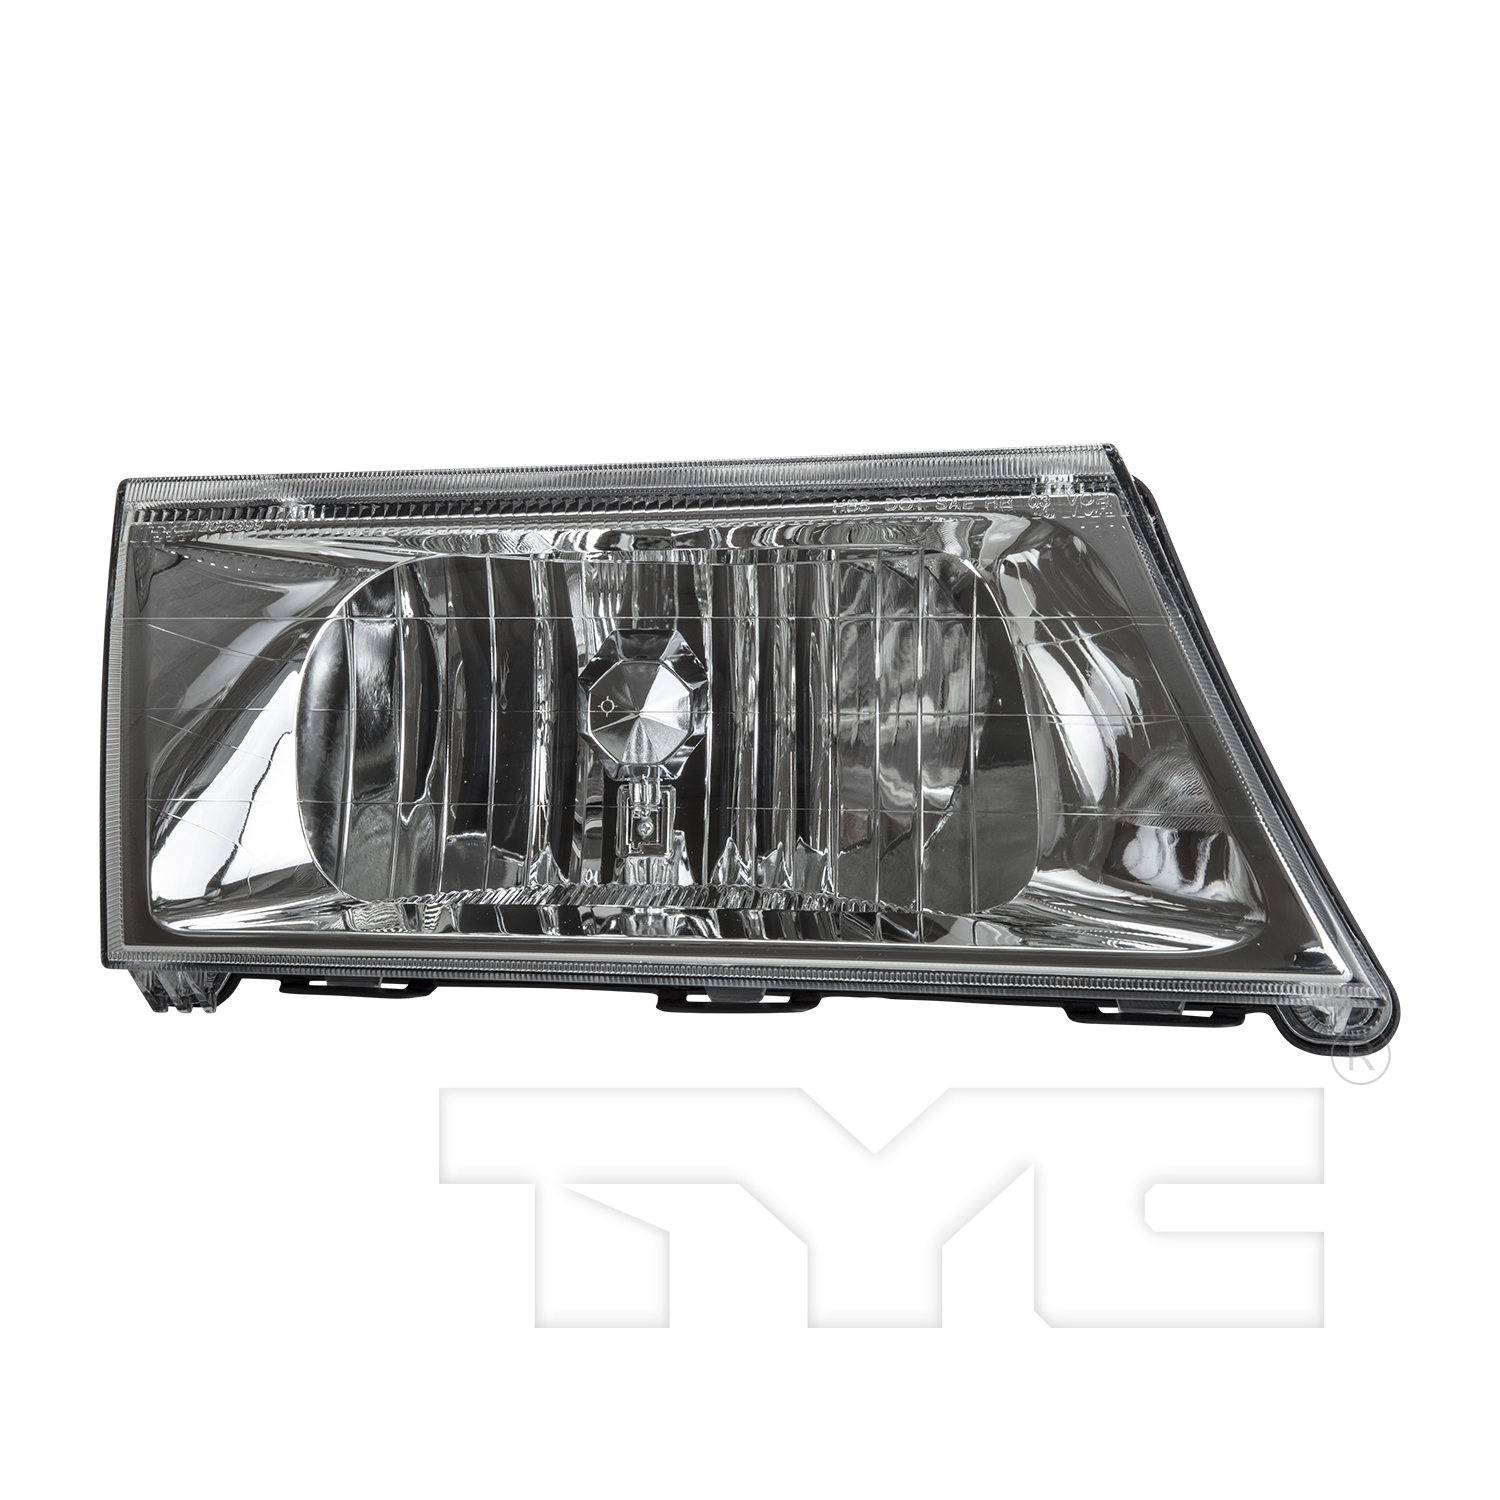 Aftermarket HEADLIGHTS for MERCURY - GRAND MARQUIS, GRAND MARQUIS,03-04,RT Headlamp assy composite